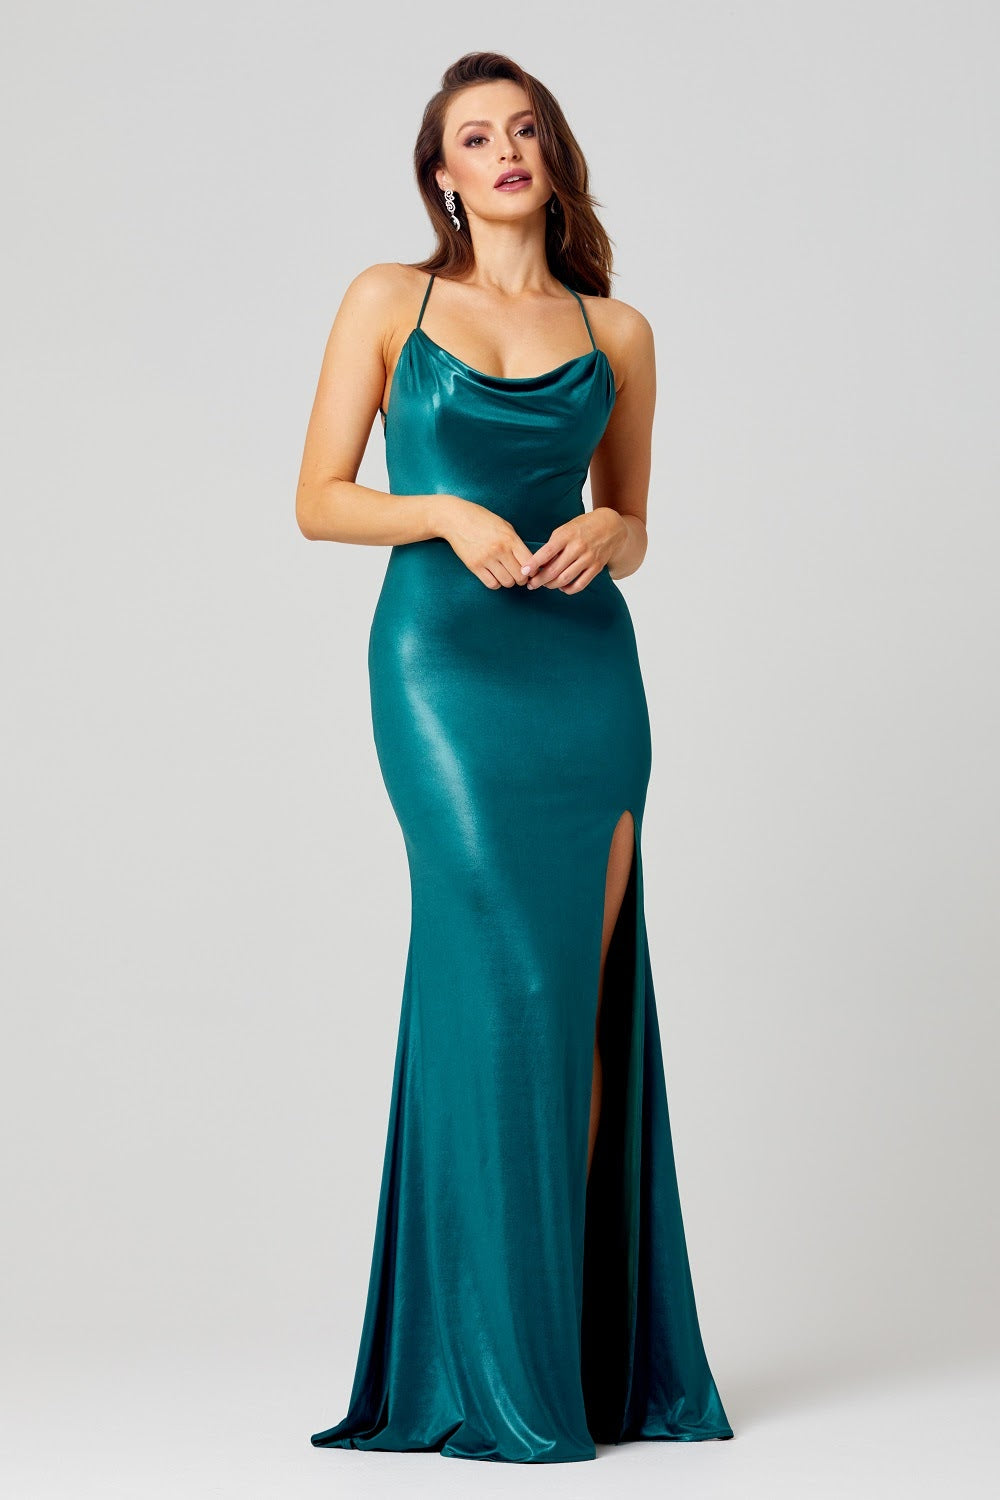 PO858 Piper front of teal fully lined, floor length, deluxe jersey formal dress